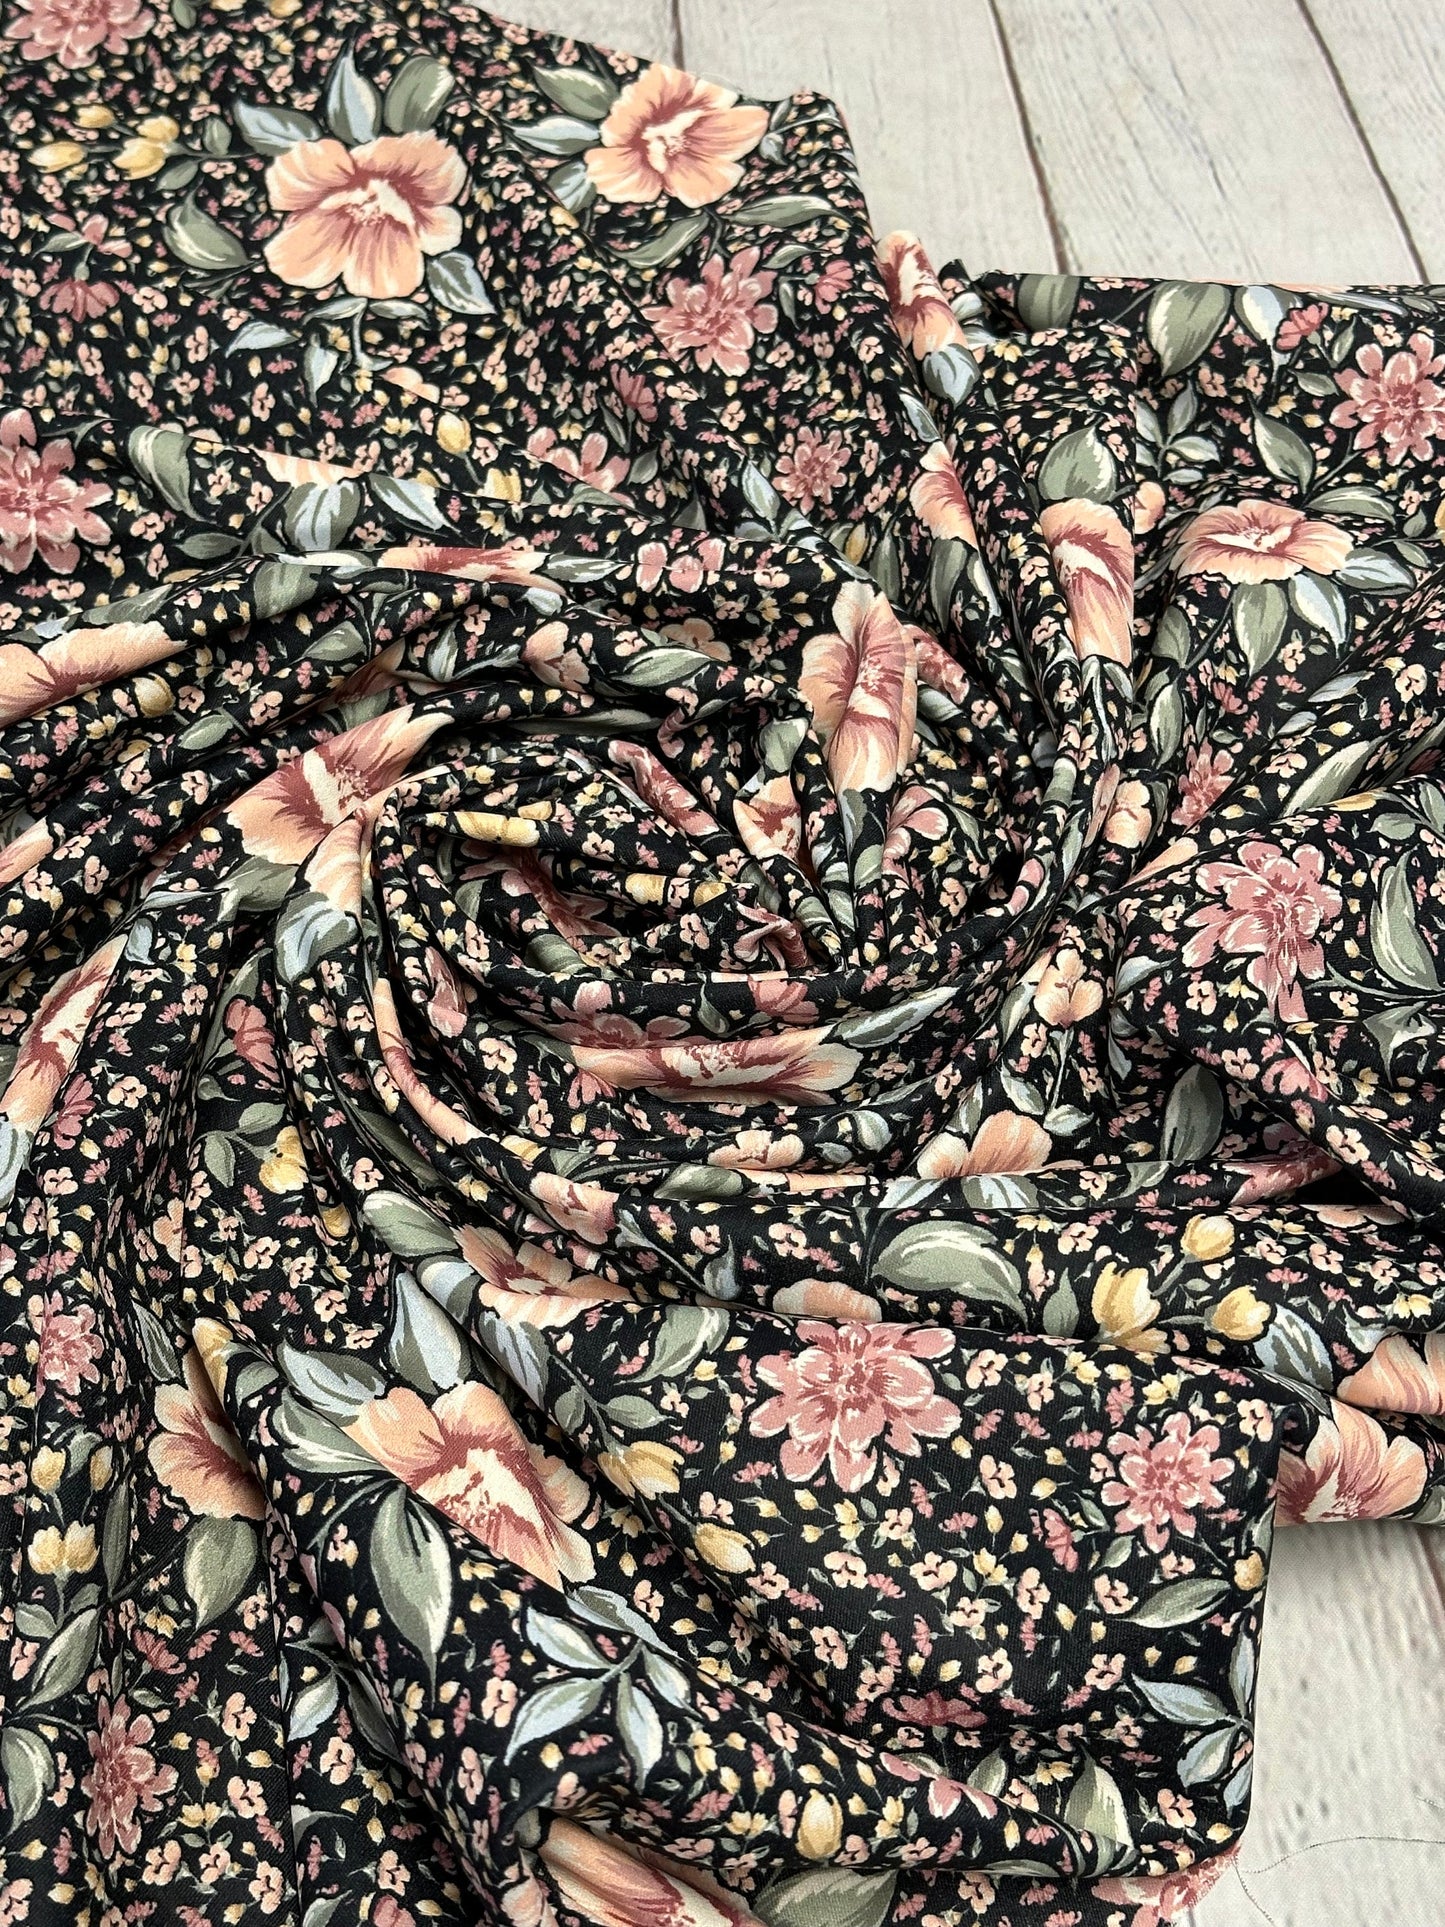 Airflow Woven Print Fabric By The Yard Big and Small Multi Color Summer  Floral Print Black